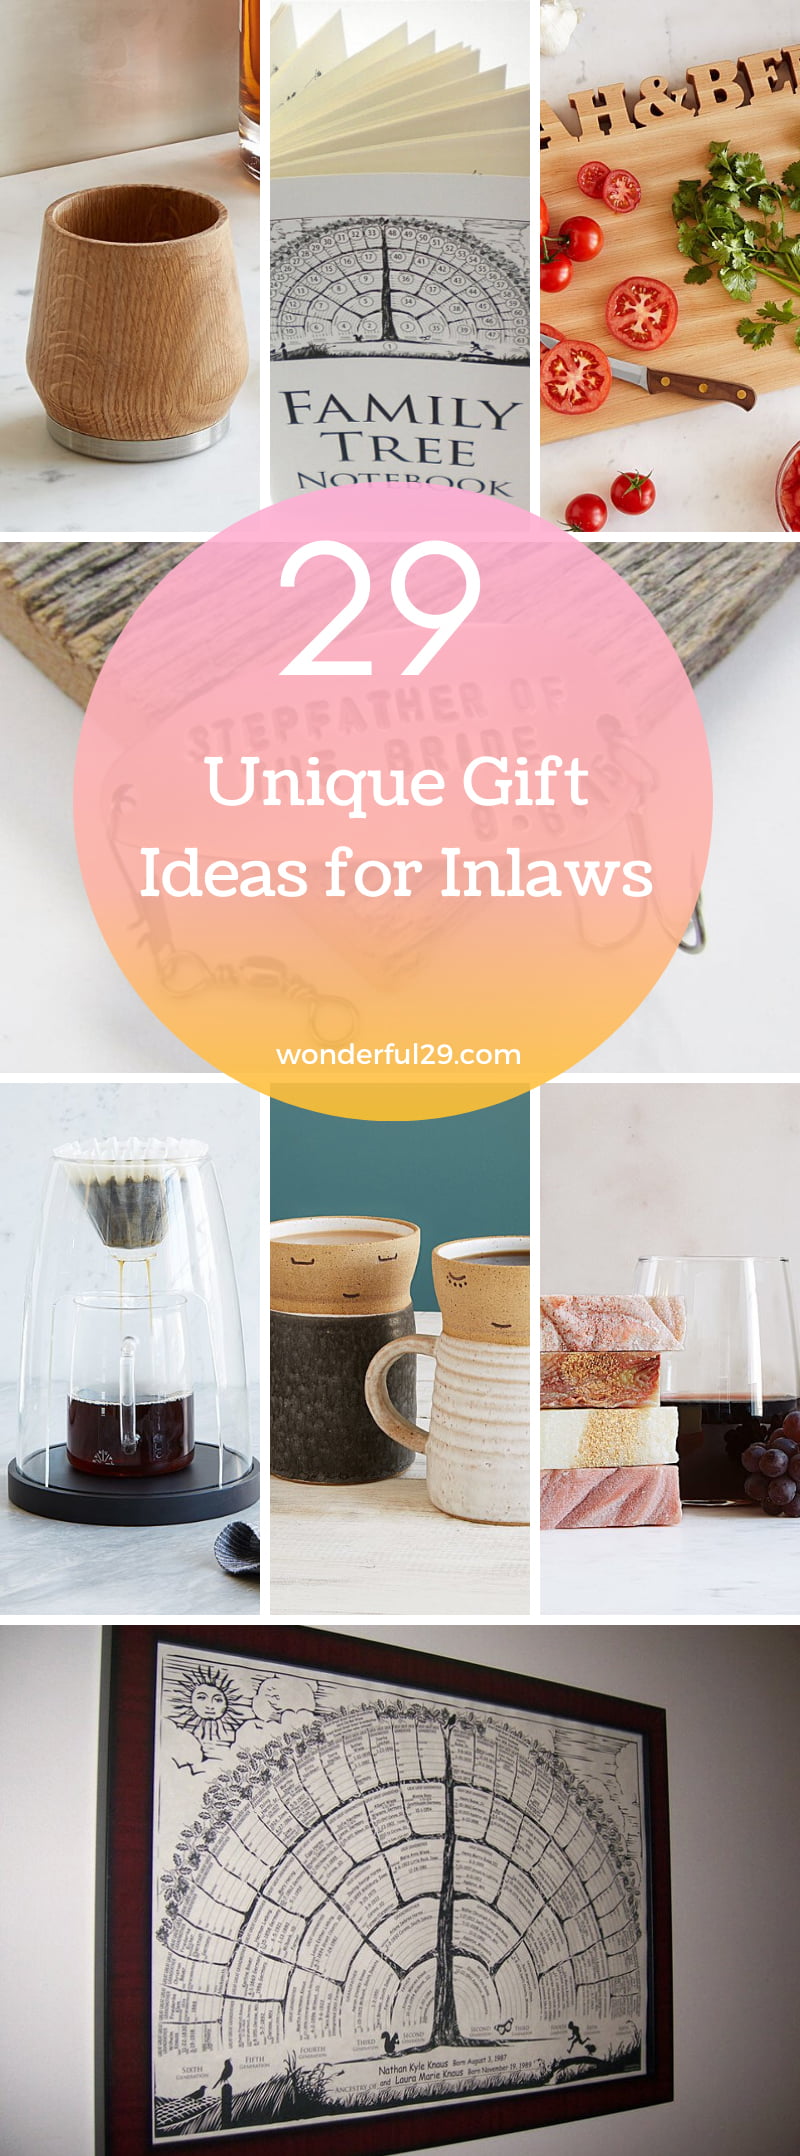 Gift Ideas for Inlaws